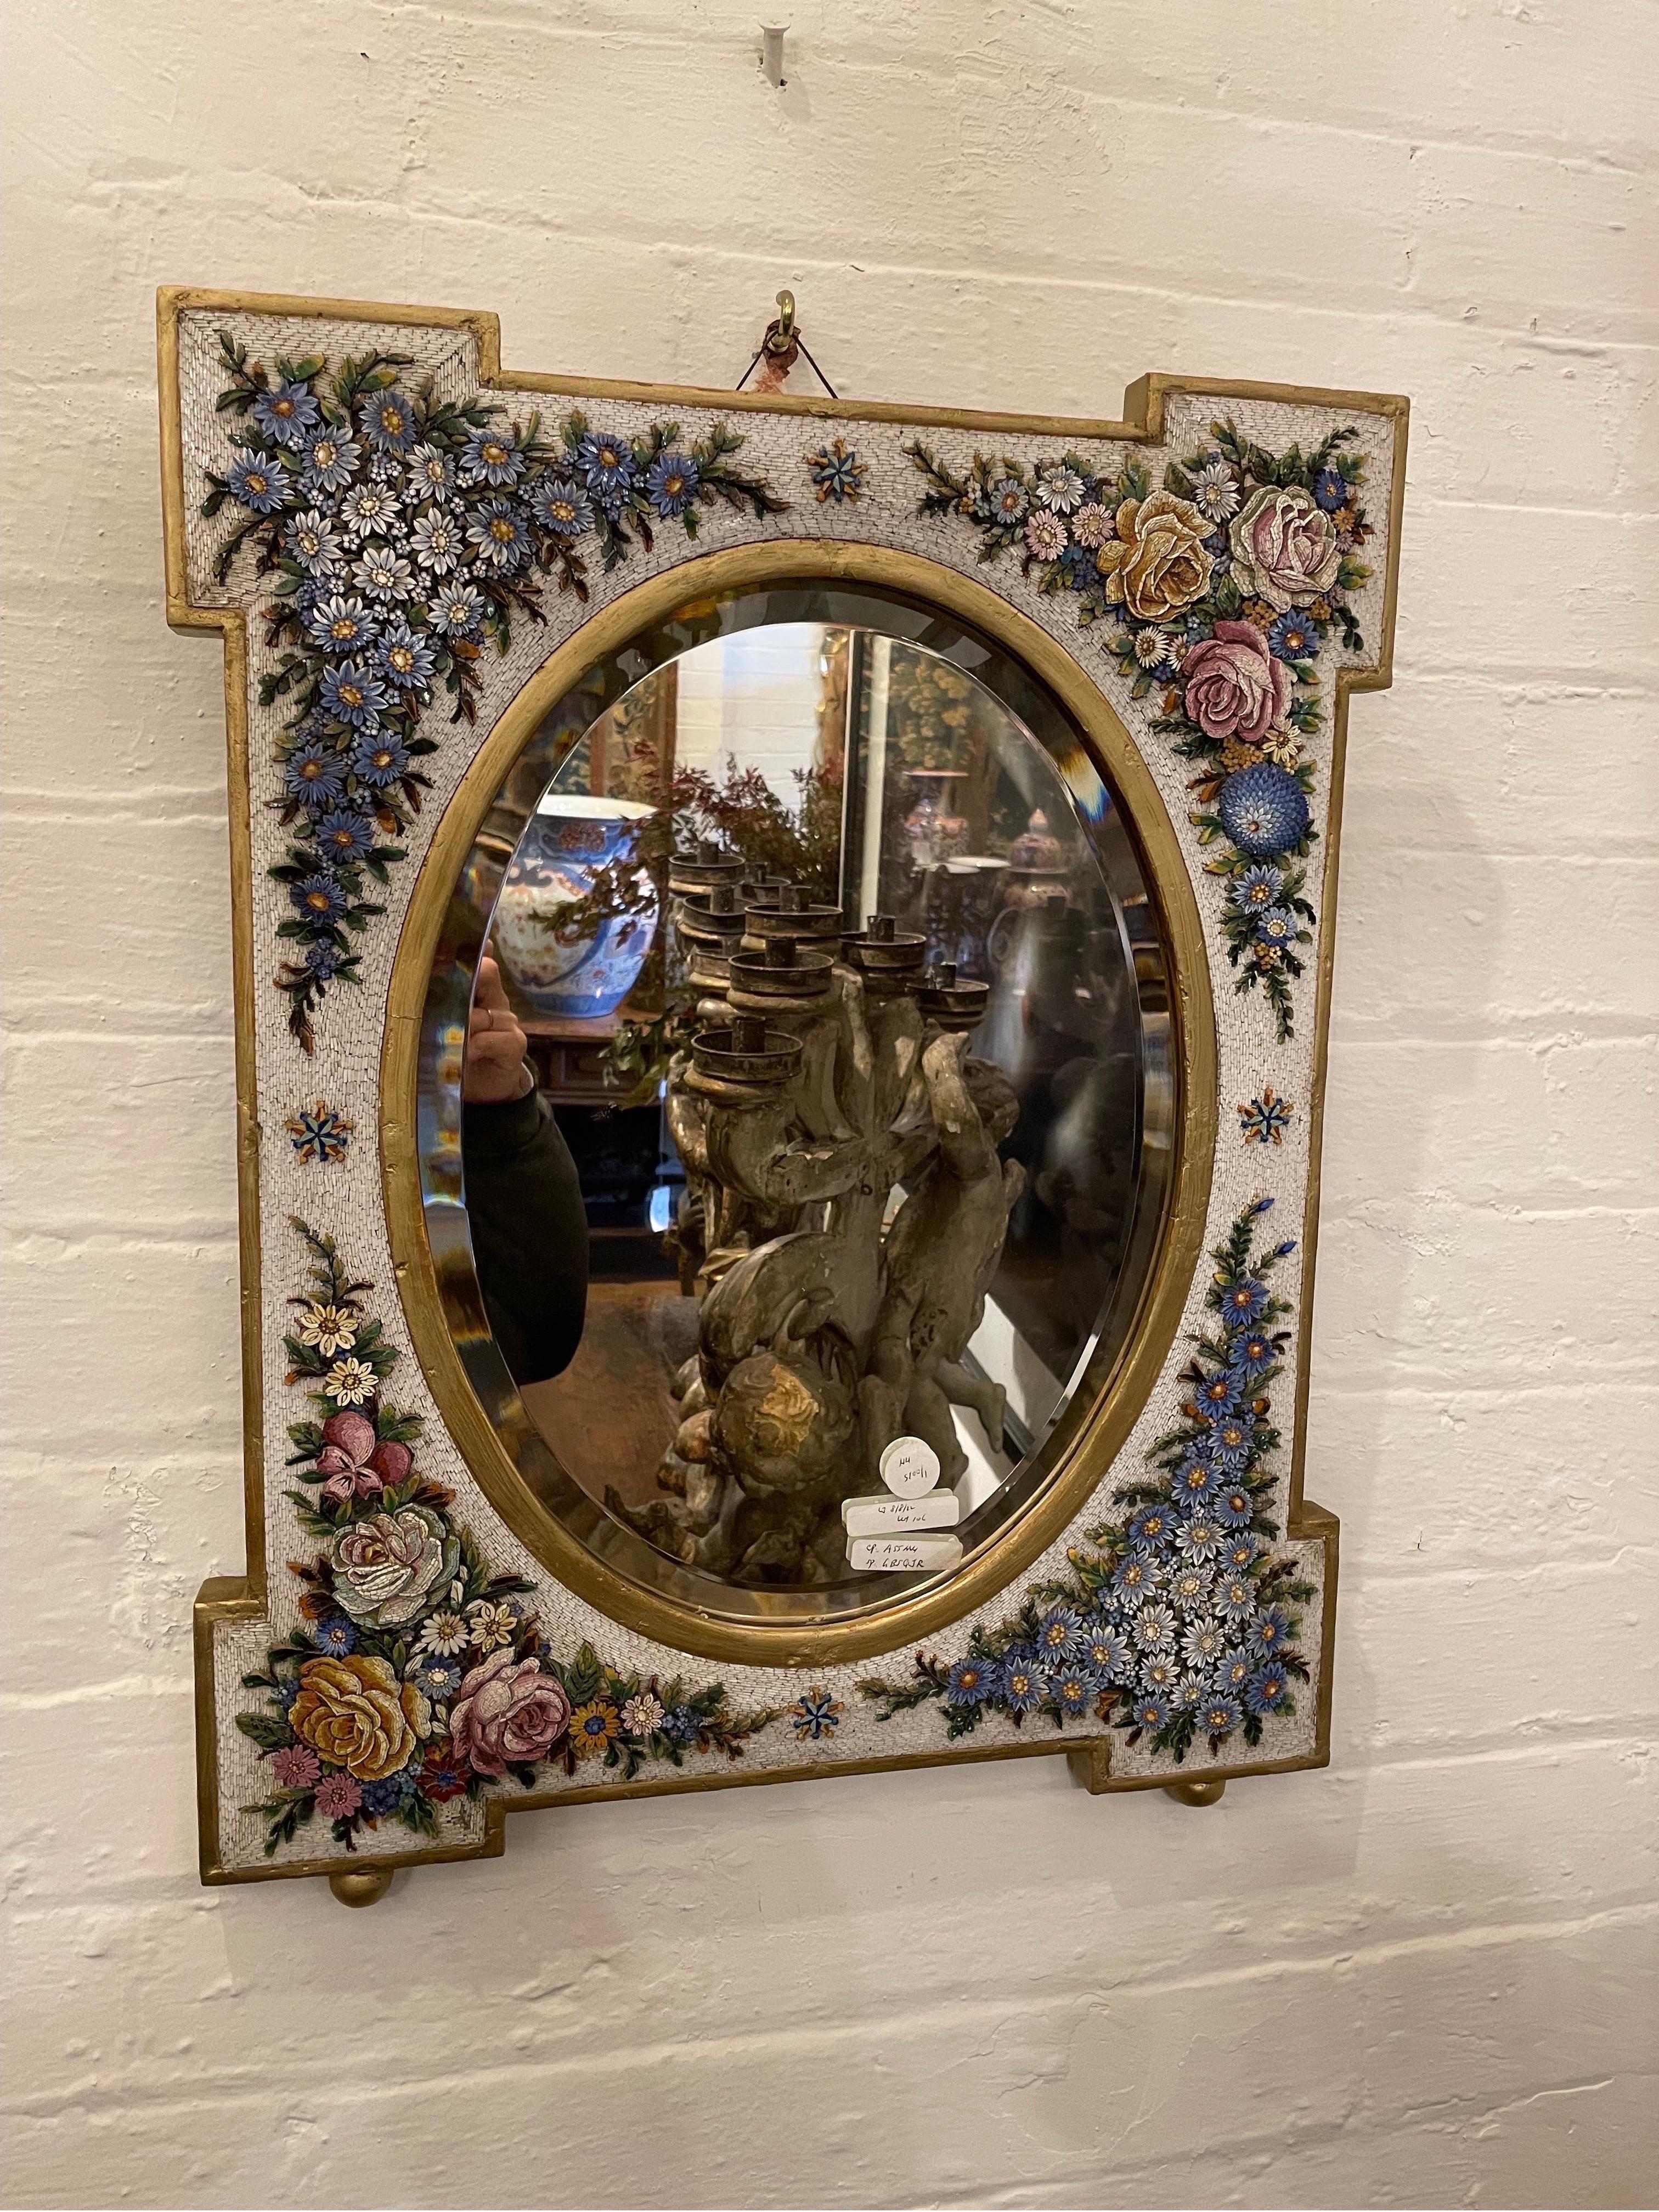 19th Century A Venetian Micromosaic-Framed Mirror, Late 19th century For Sale